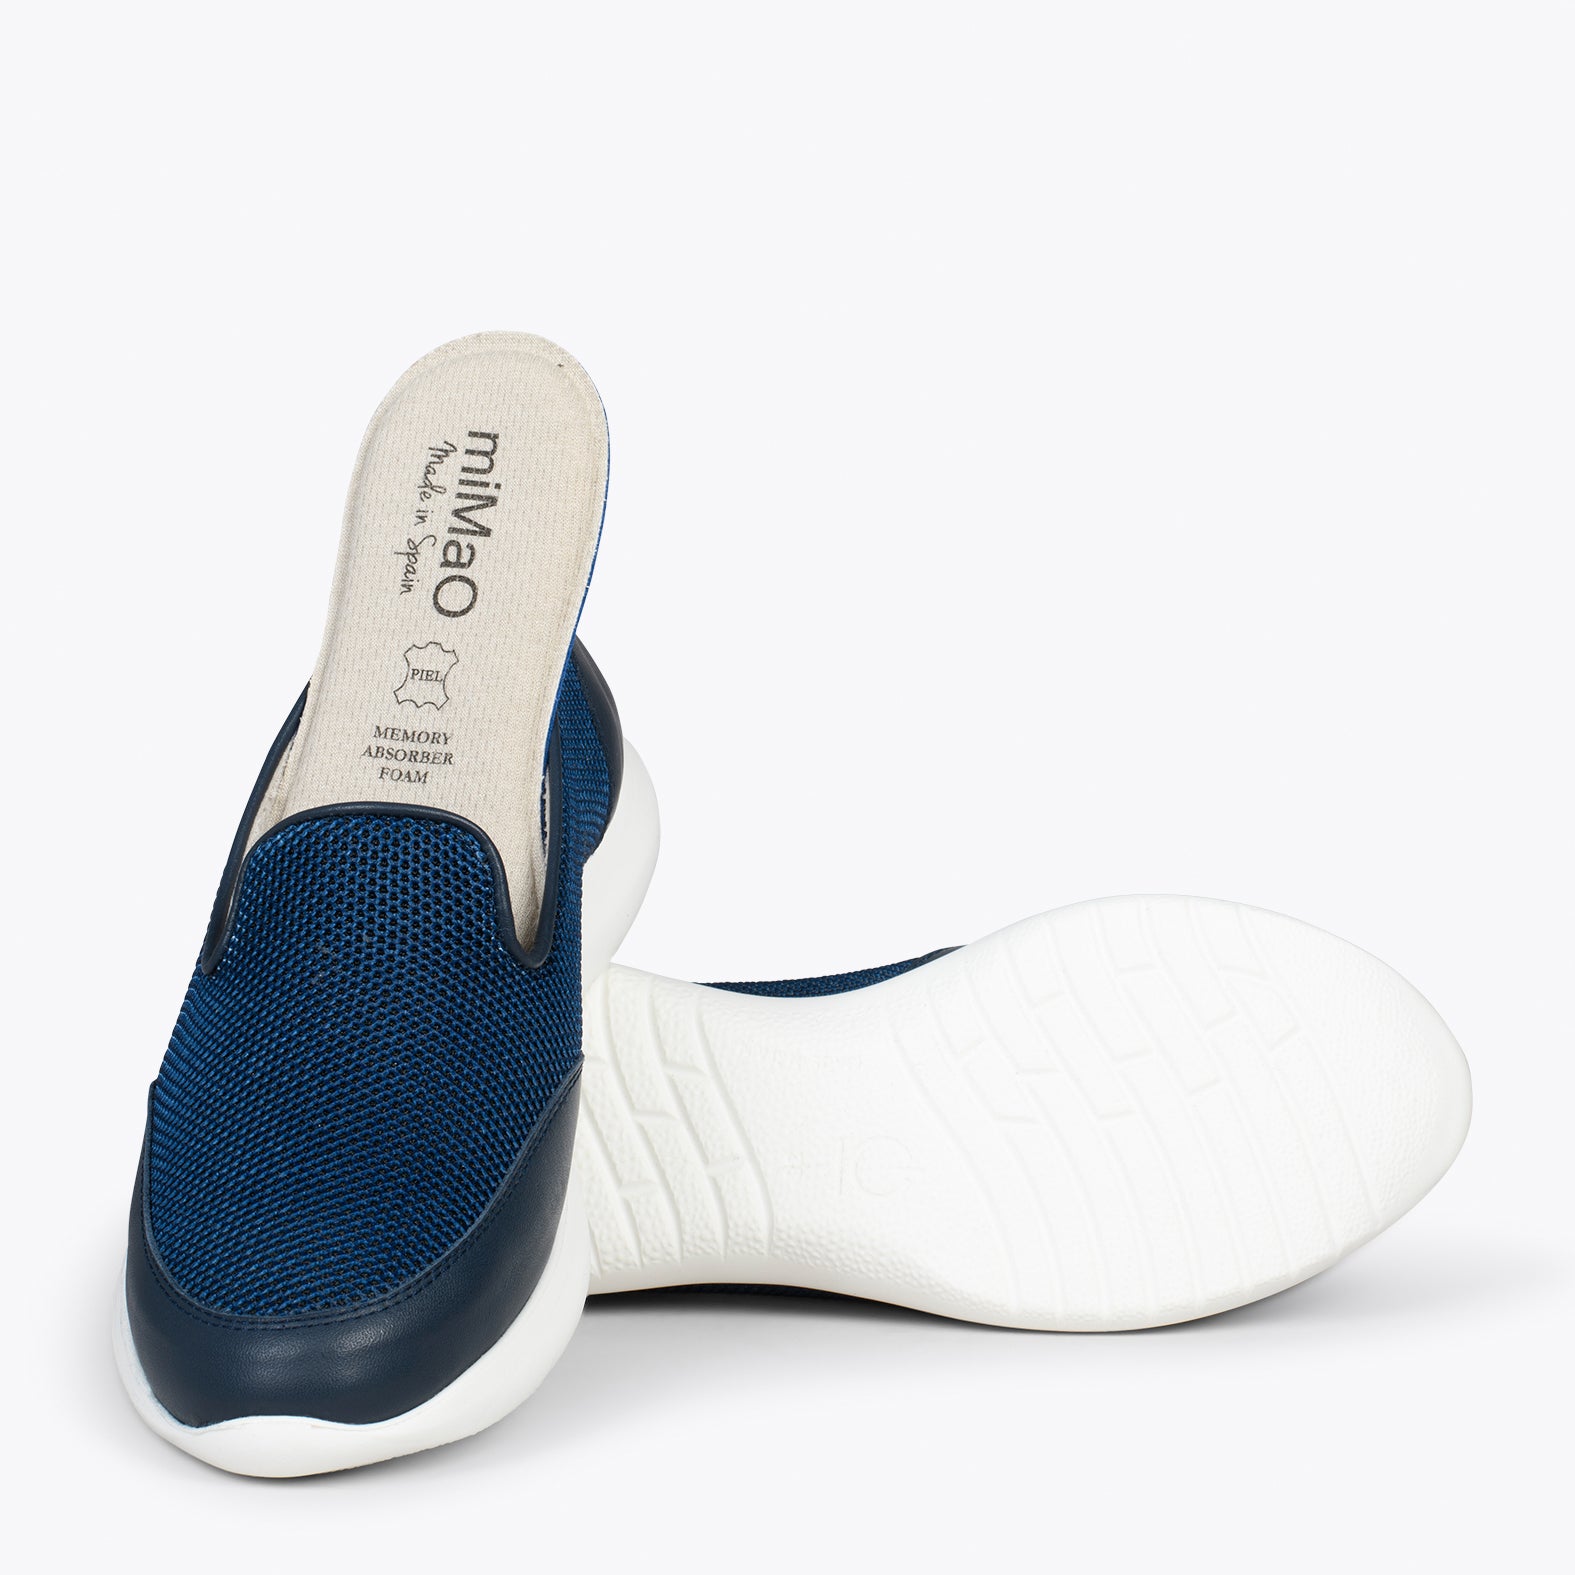 SLIPPER SPORT – NAVY sneakers with no laces and mesh design